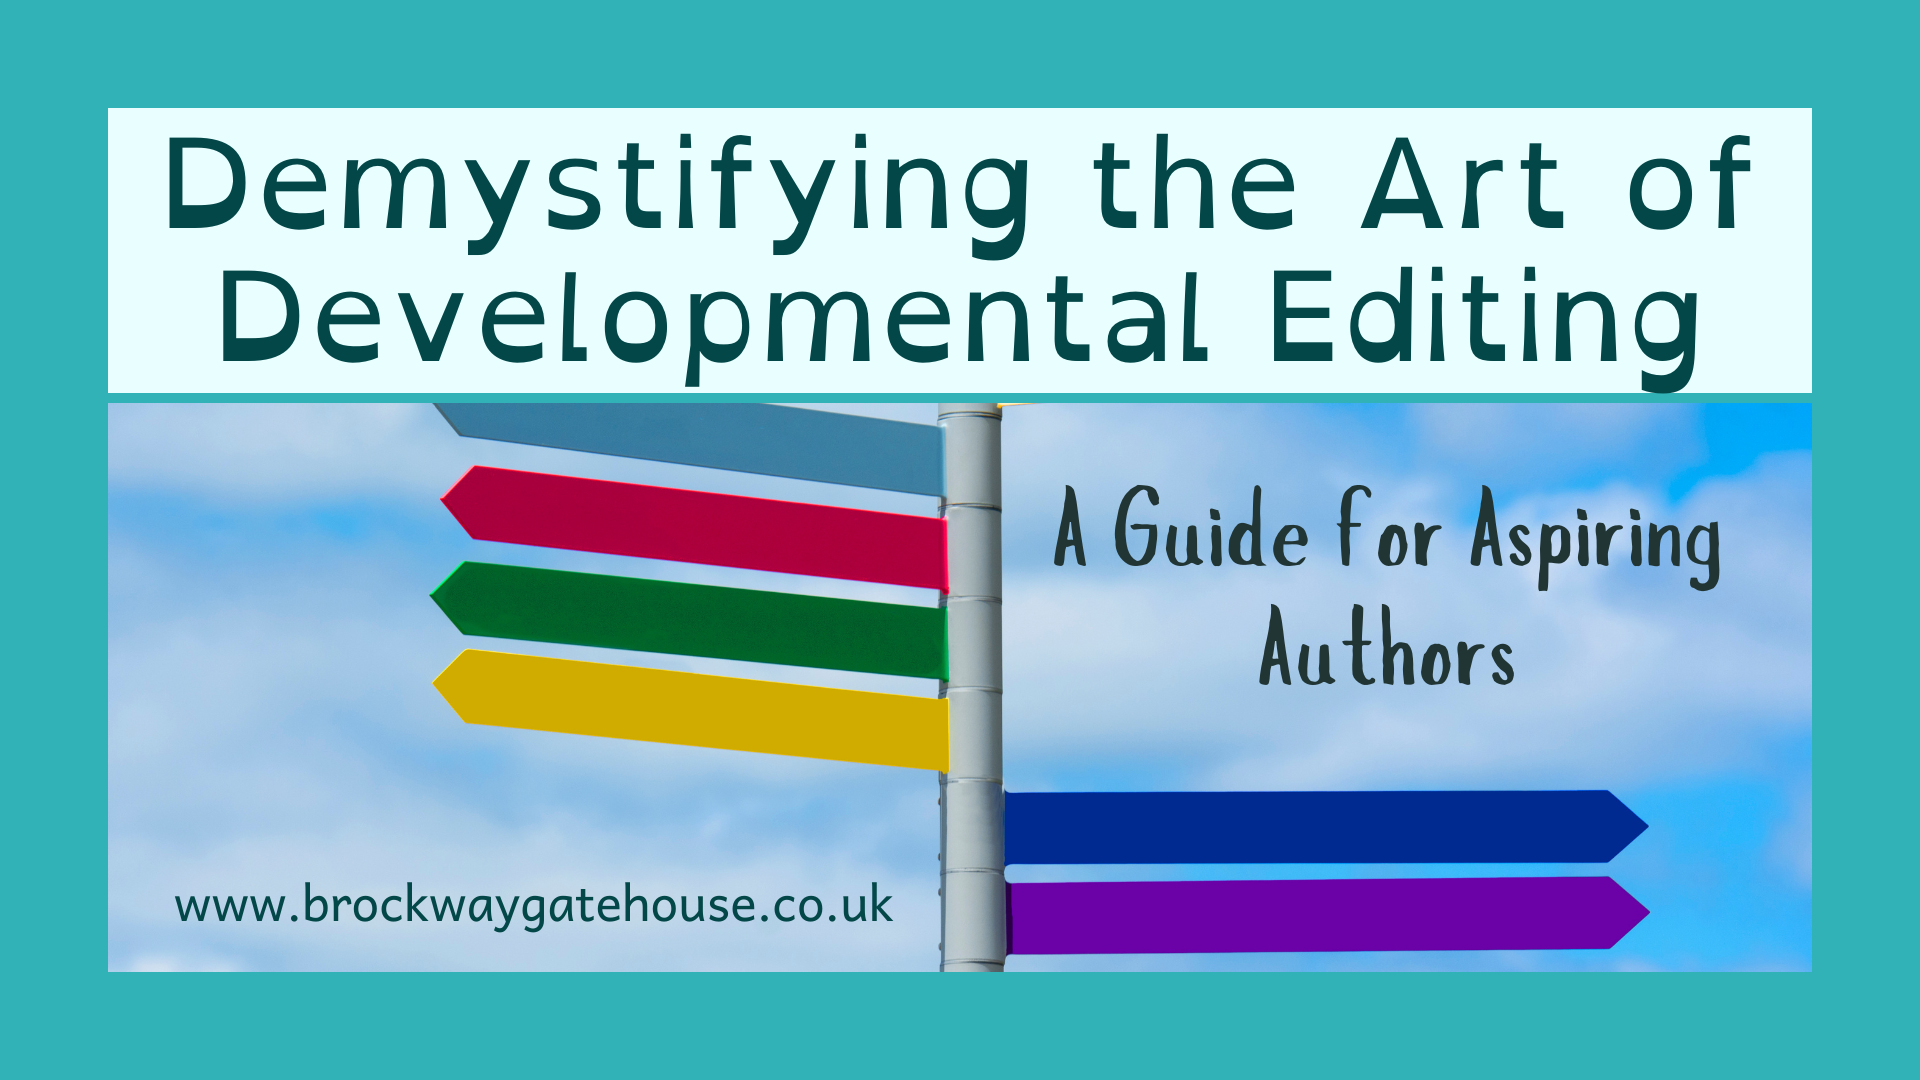 Demystifying the Art of Developmental Editing: A Guide for Aspiring Authors